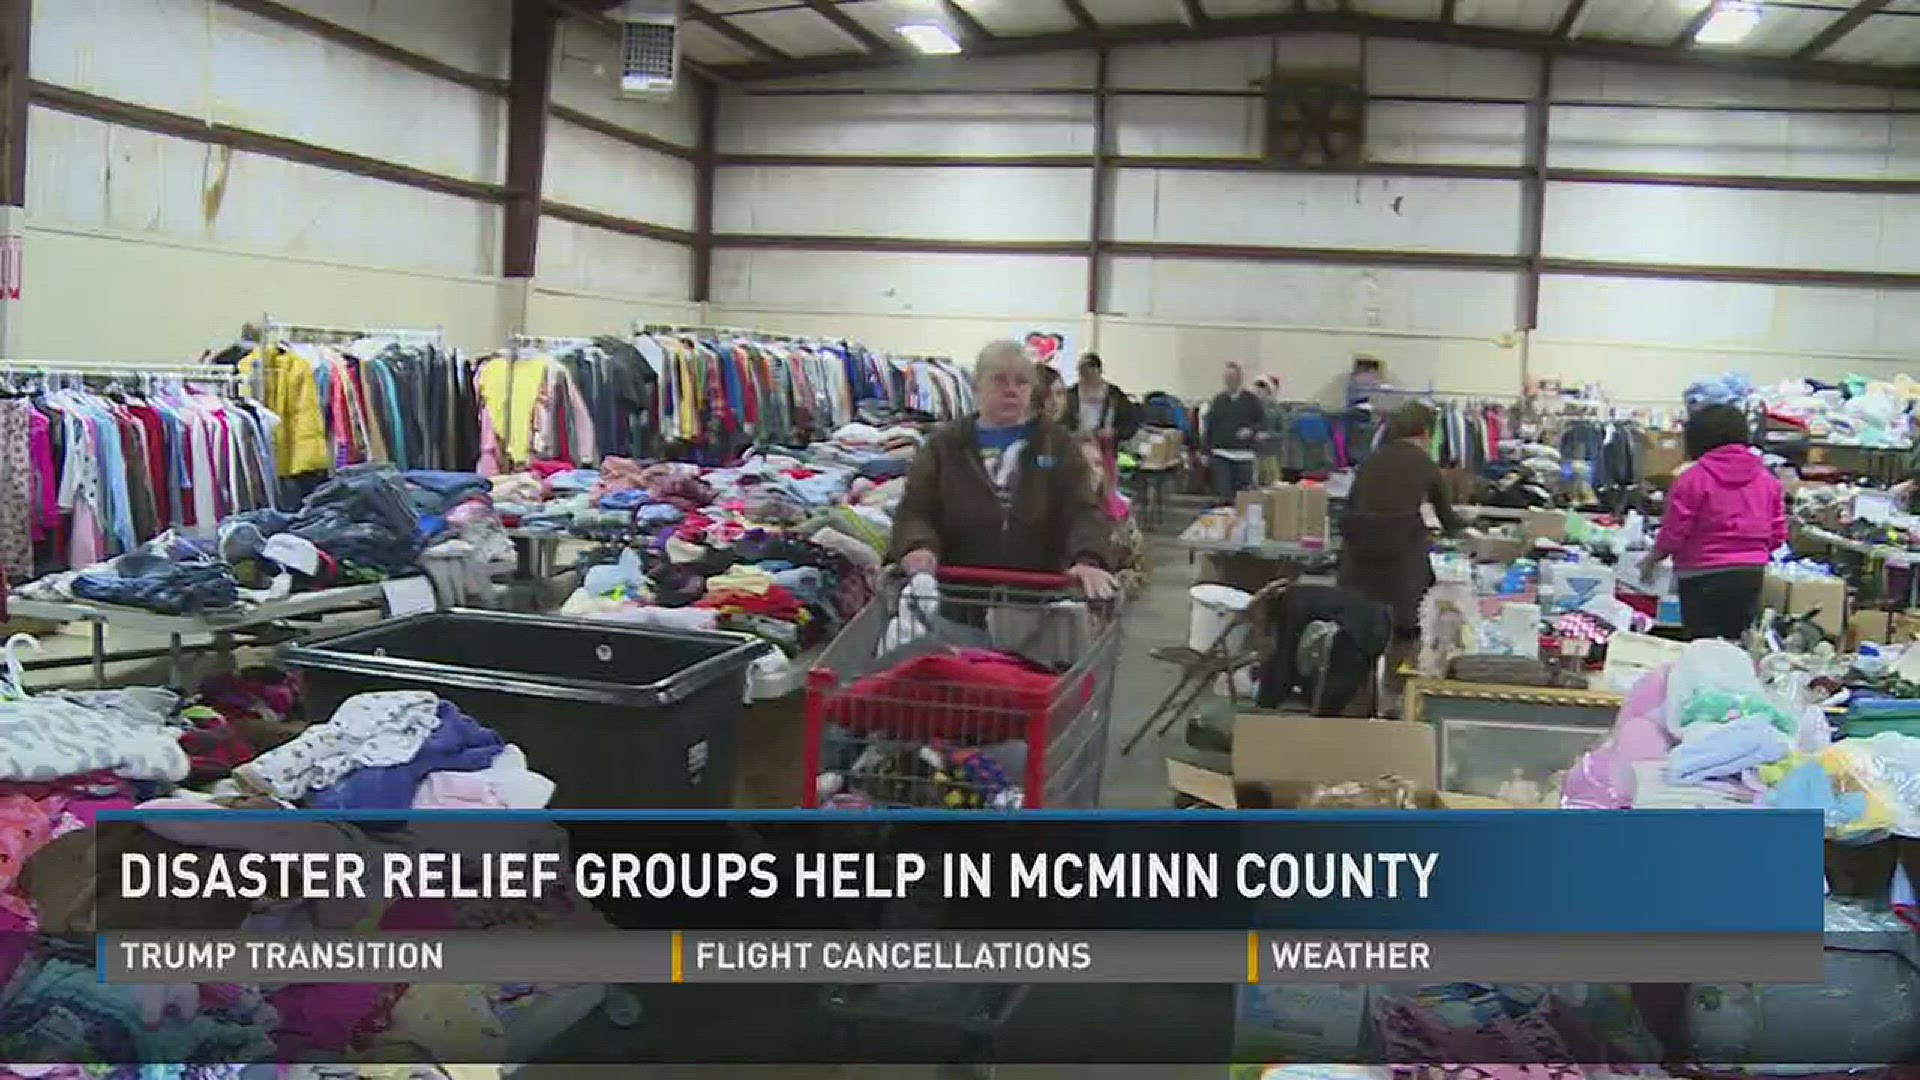 Dec. 11, 2016: Disaster relief groups are helping McMinn County families work toward long-term recovery following recent tornado damage.